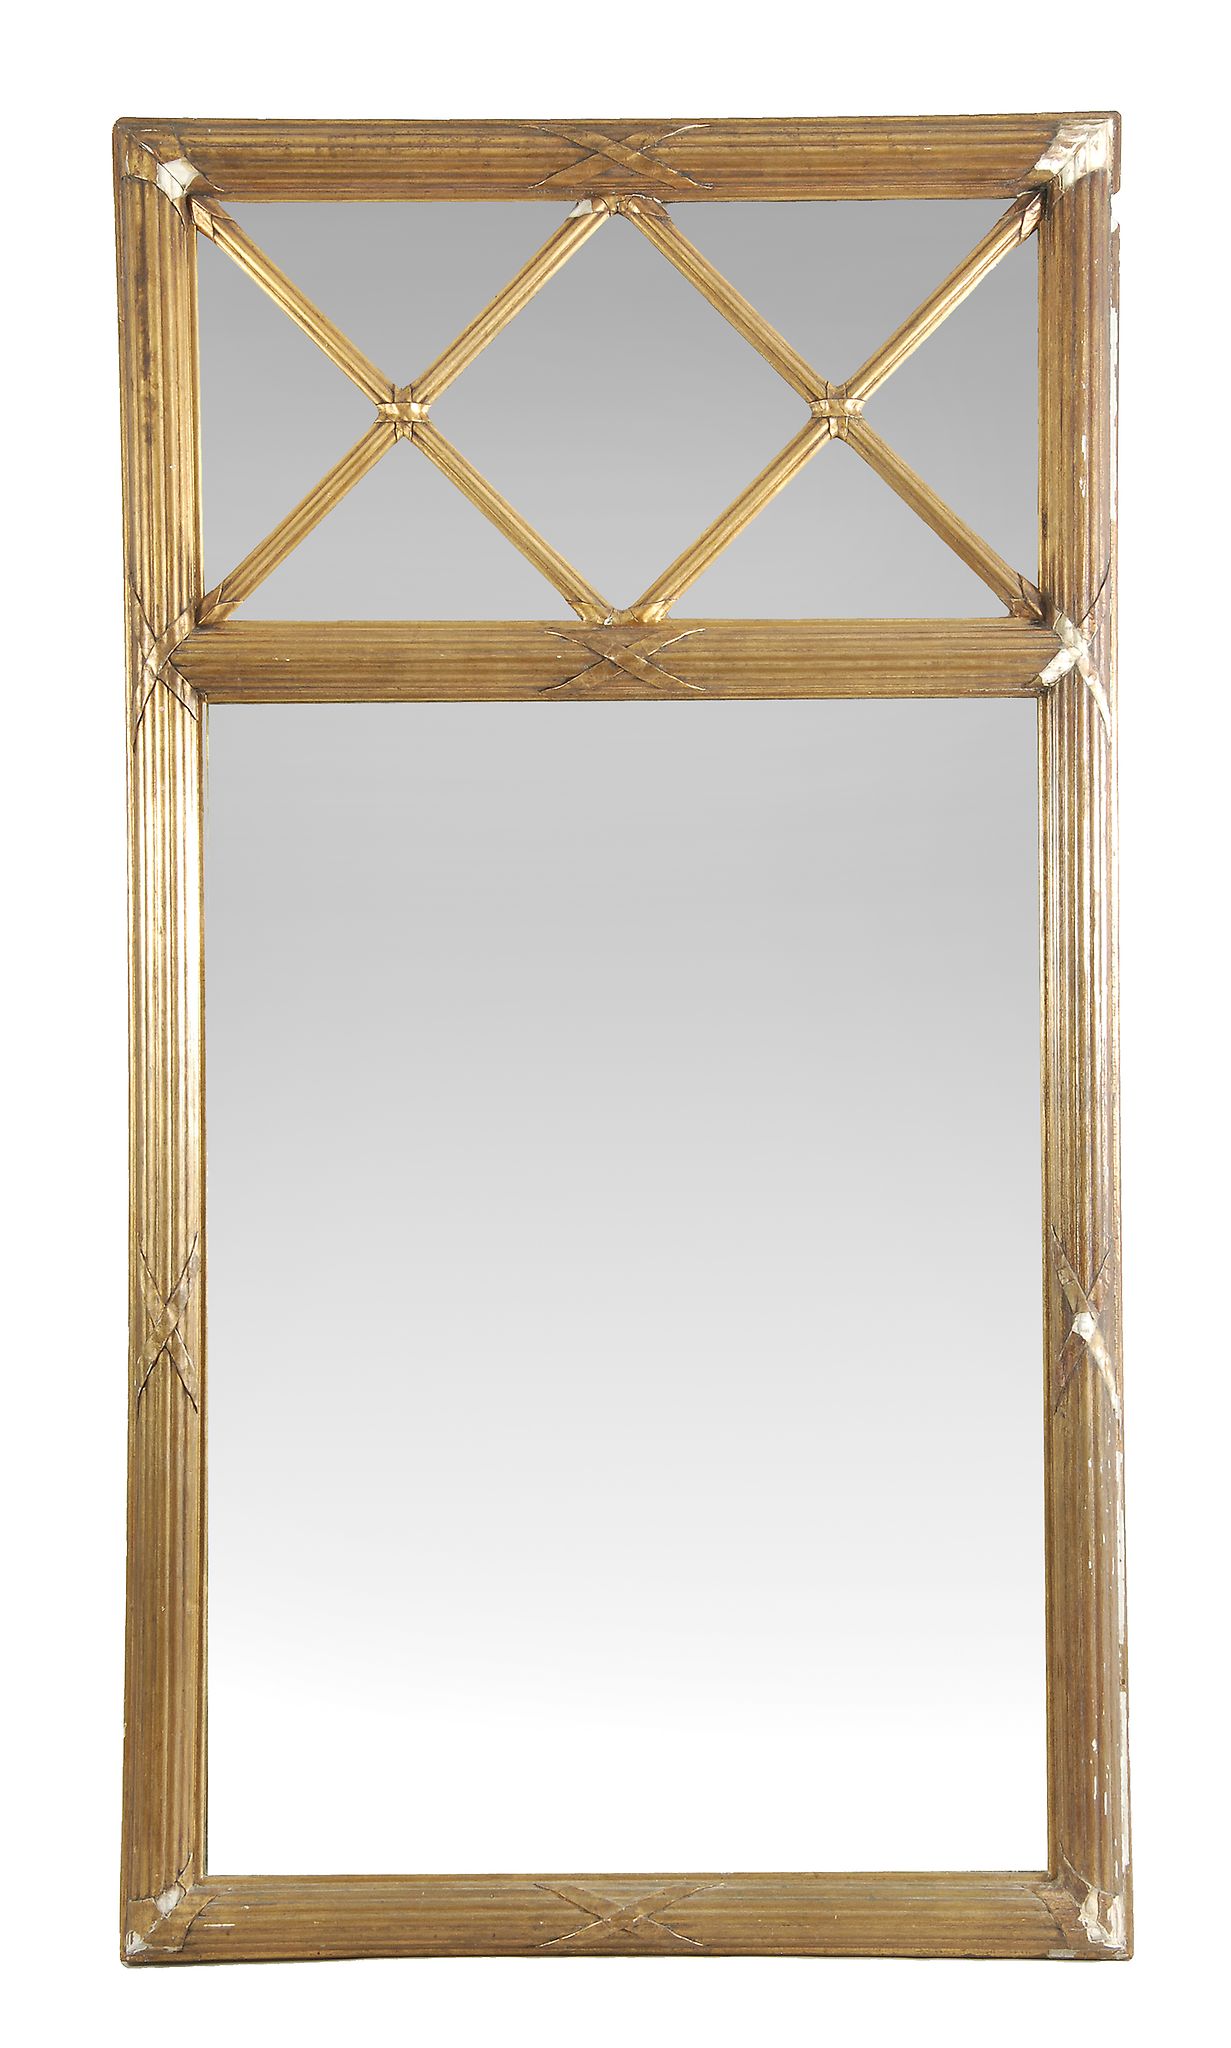 A giltwood and composition wall mirror, circa 1825, possibly Danish or Swedish A giltwood and